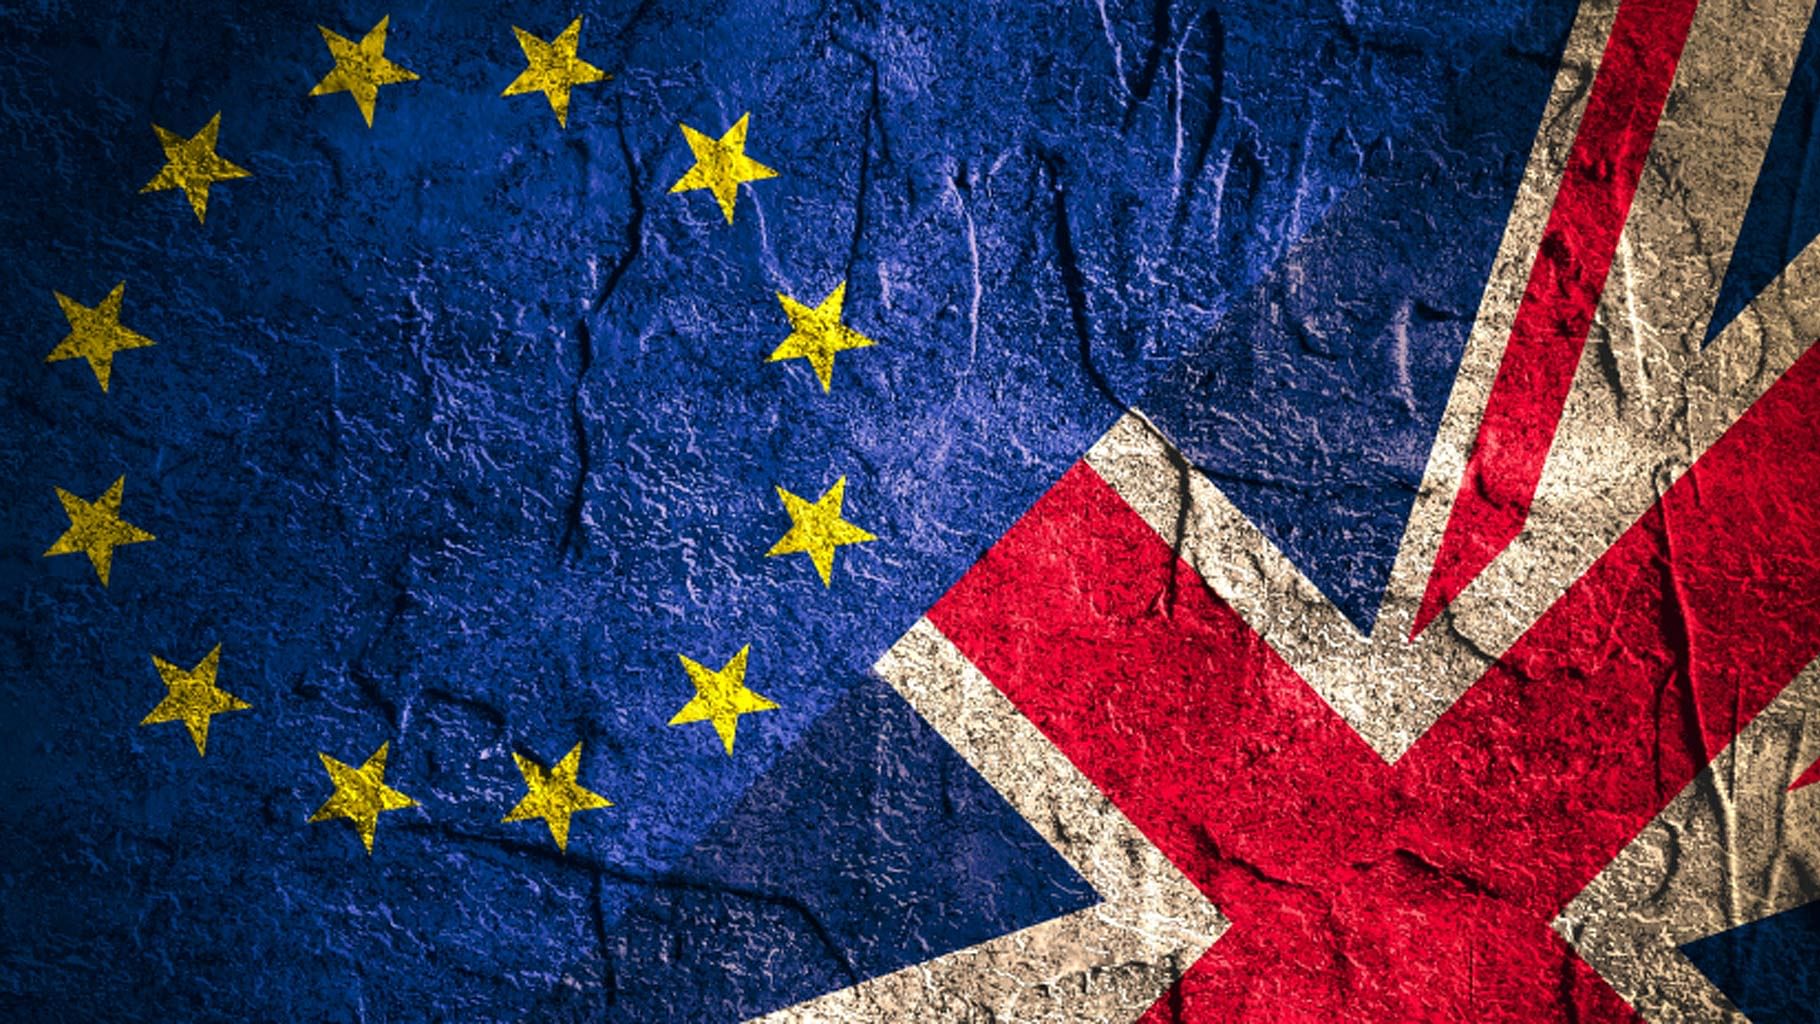 Britain vote on the “Brexit” issue. (Photo: iStockphoto)